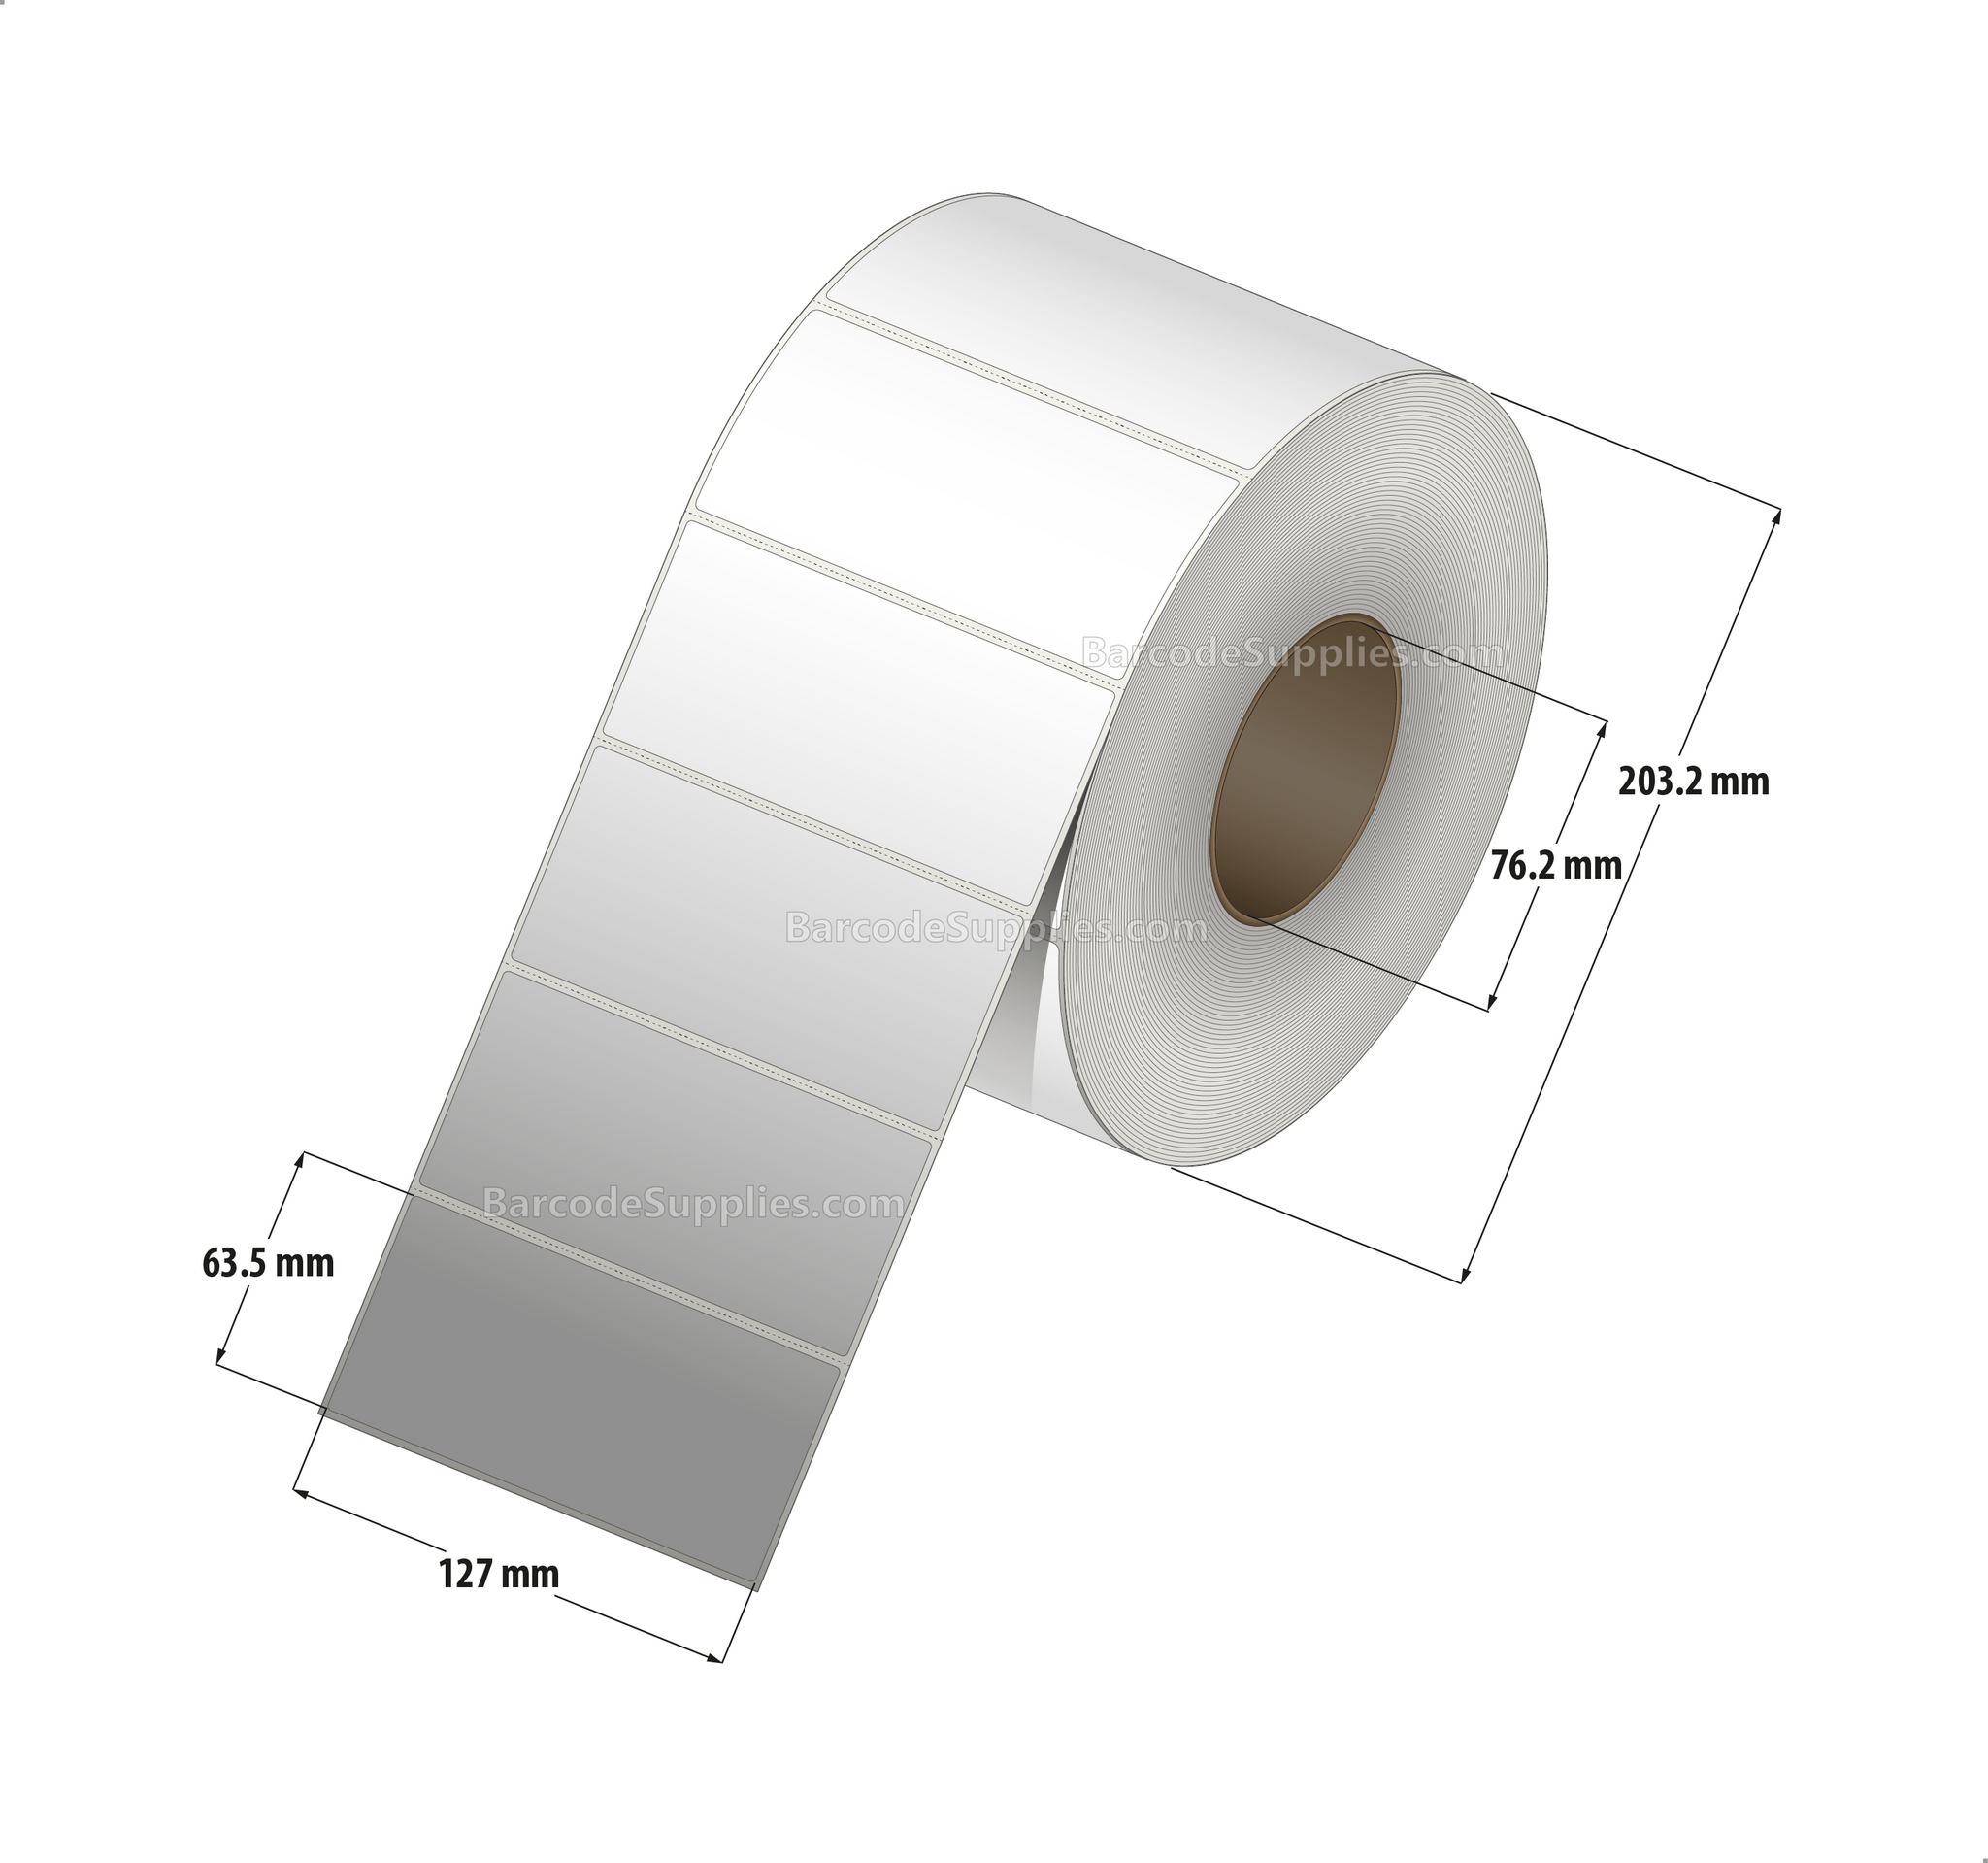 5 x 2.5 Thermal Transfer White Labels With Permanent Adhesive - Perforated - 2500 Labels Per Roll - Carton Of 4 Rolls - 10000 Labels Total - MPN: RT-5-25-2500-3